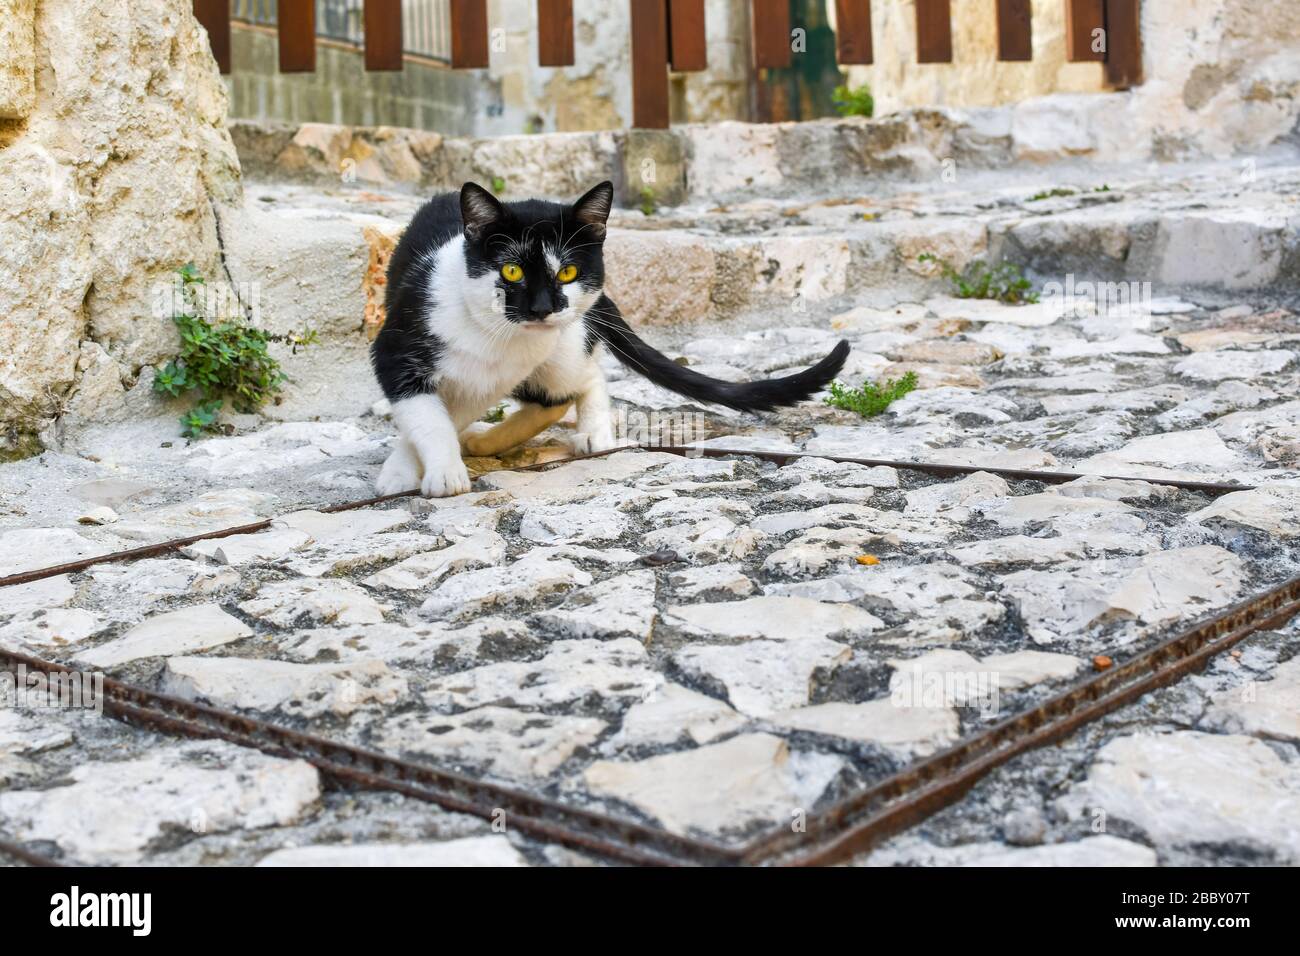 A beautiful short haired black and white cat with yellow eyes in the ancient sassi area of Matera Italy. Stock Photo